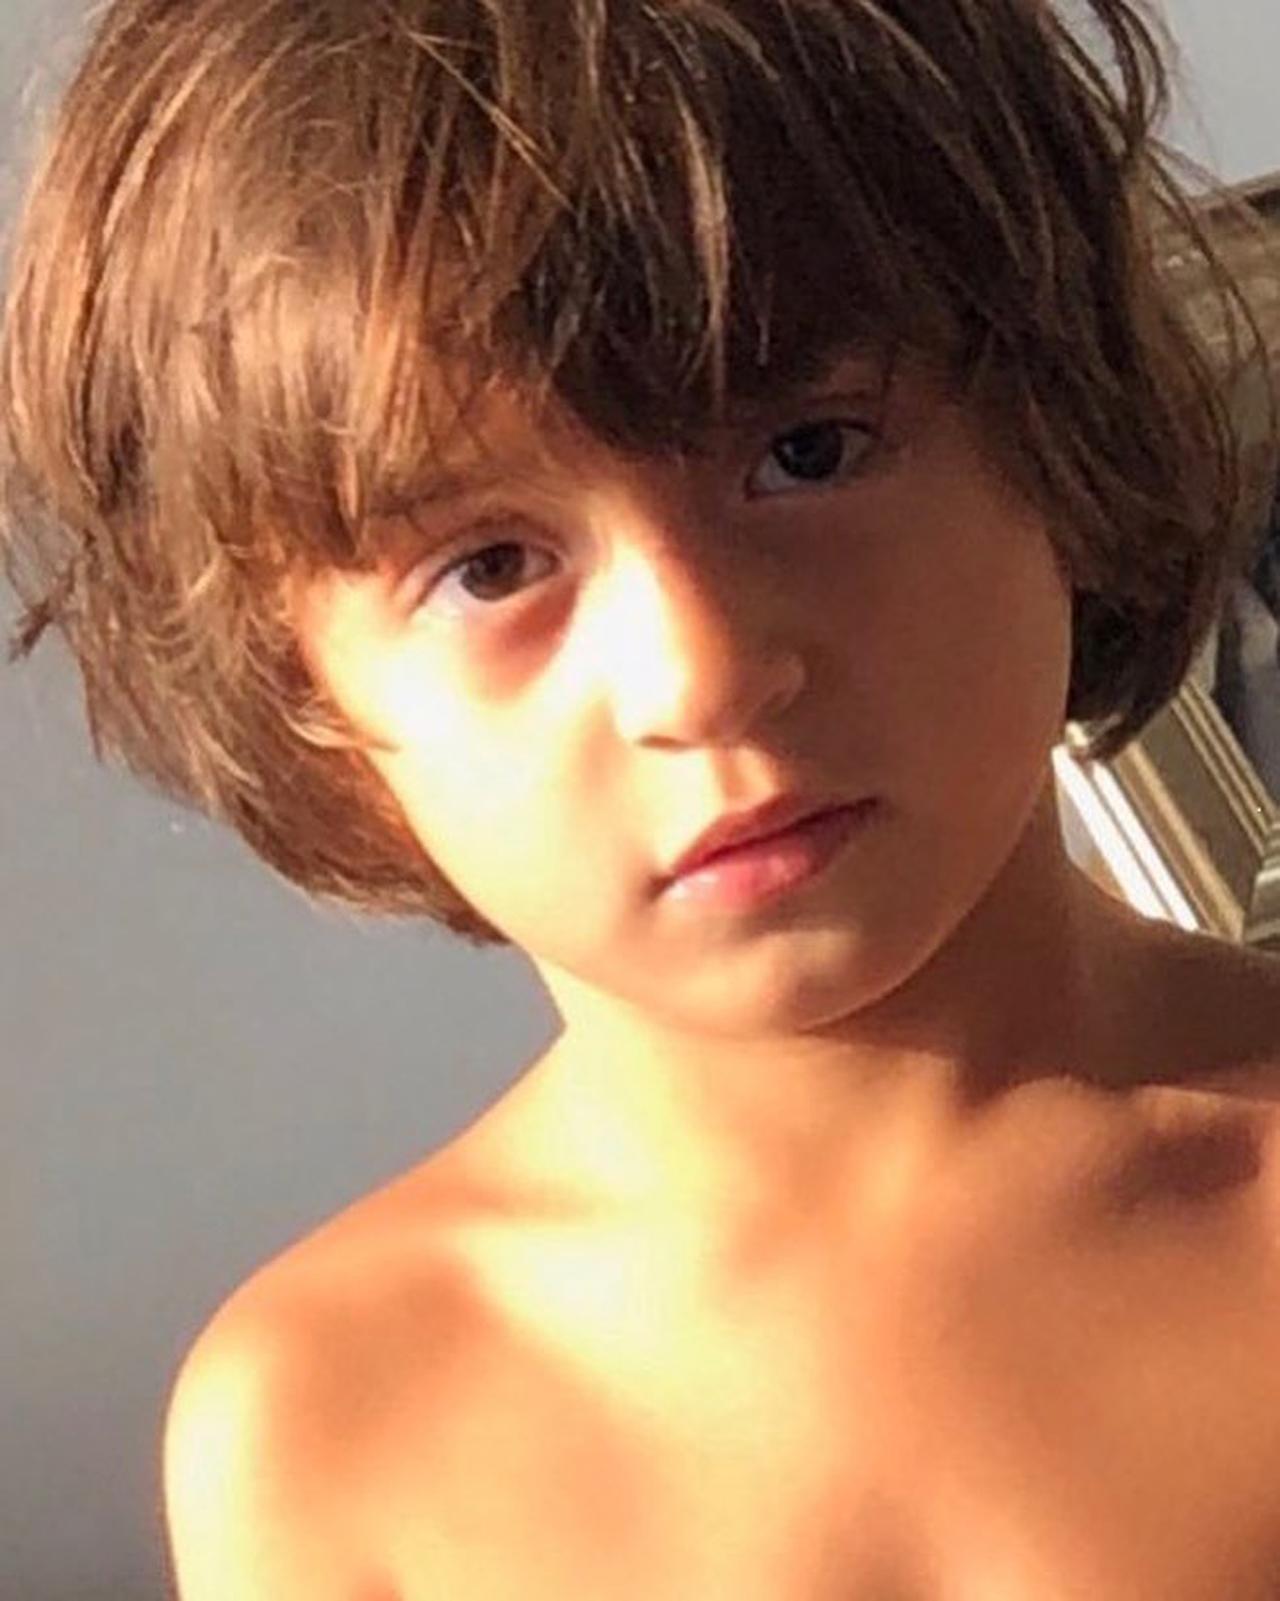 Shah Rukh Khan's toddler AbRam Khan turns 9 today on May 27. We revisit some of his most adorable pictures with SRK, Gauri Khan, Suhana Khan, and Aryan Khan. Well, here, he enjoys his own company and that too shirtless, looking cute as a button.